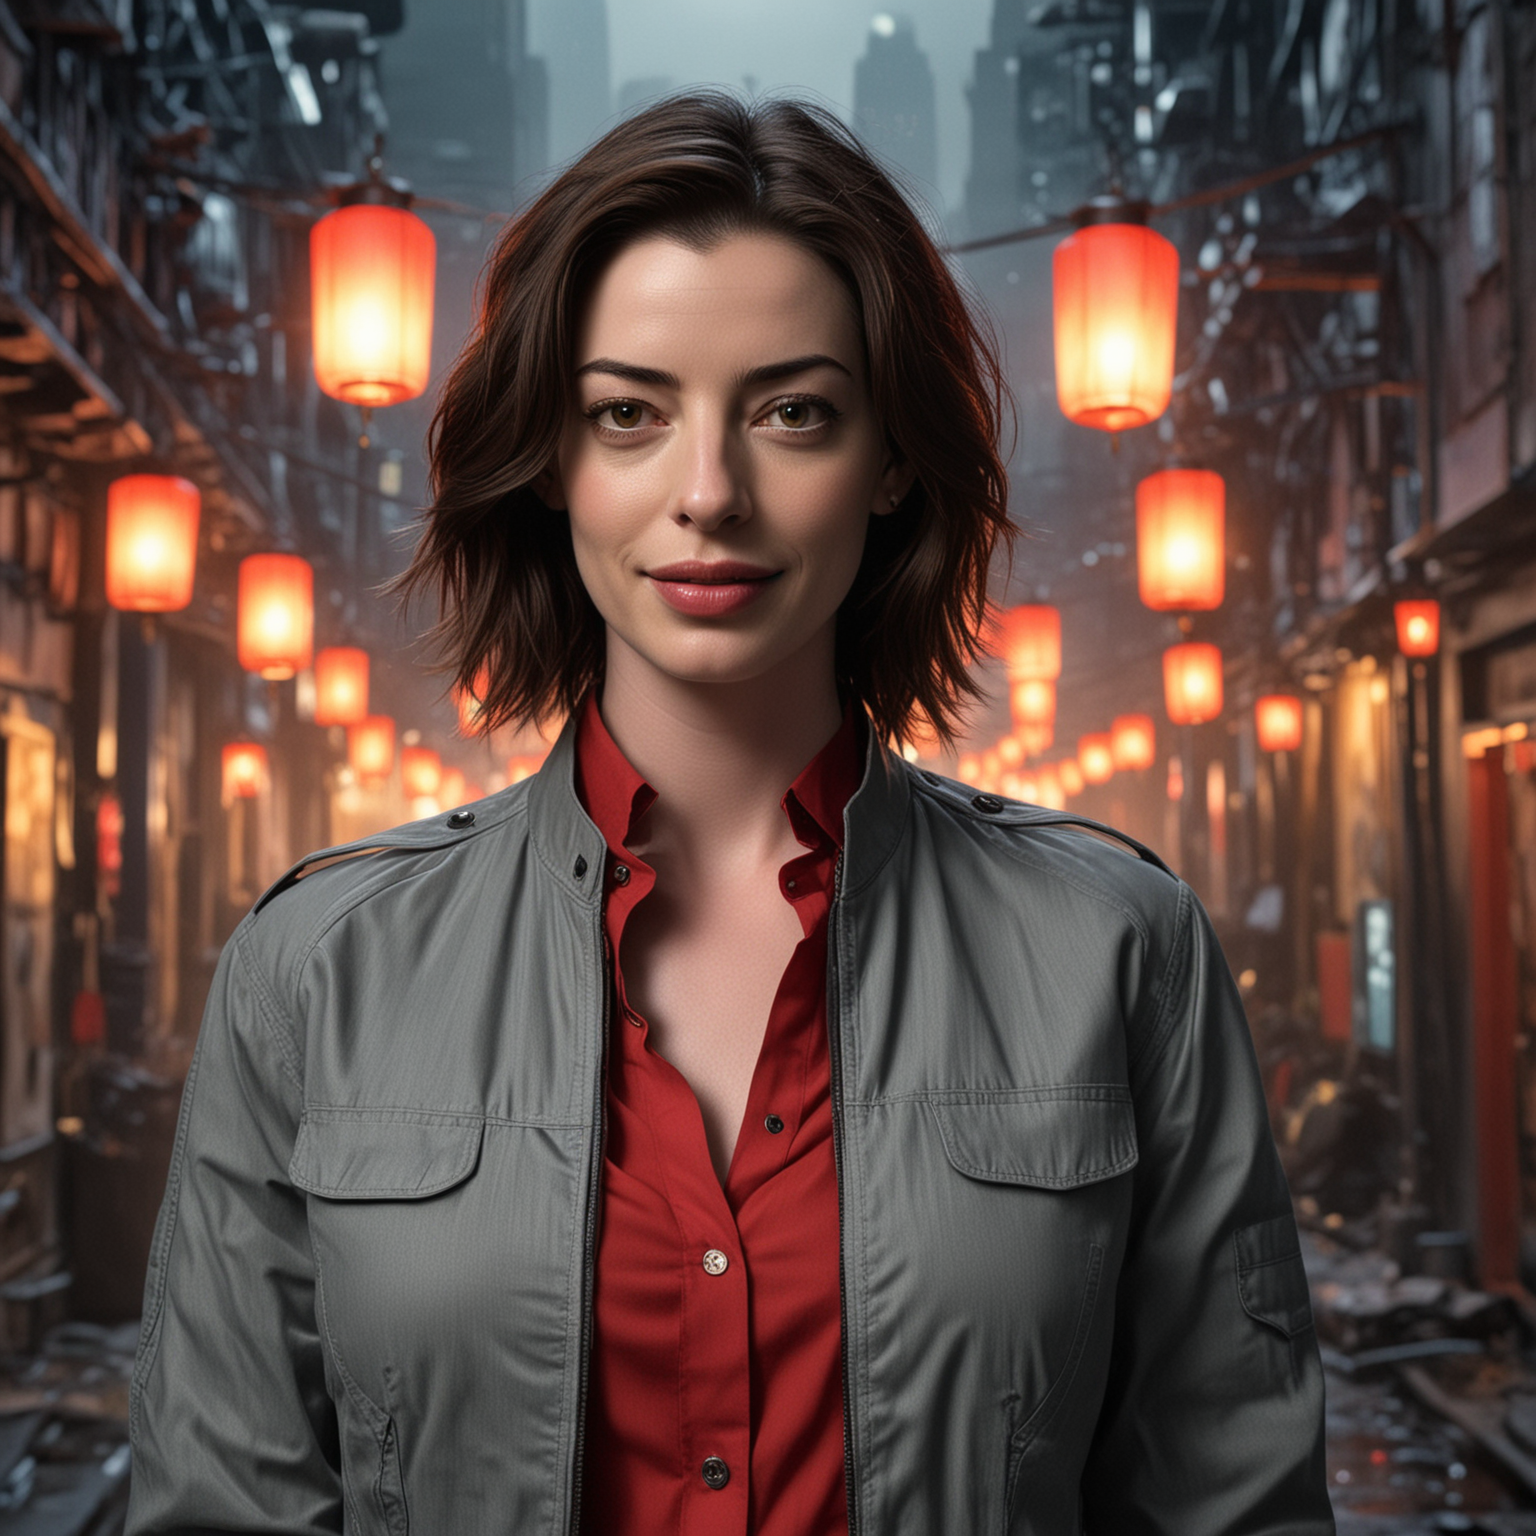 Anne Hathaway in Cyberpunk Setting with Red Collarless Shirt and Grey Jacket